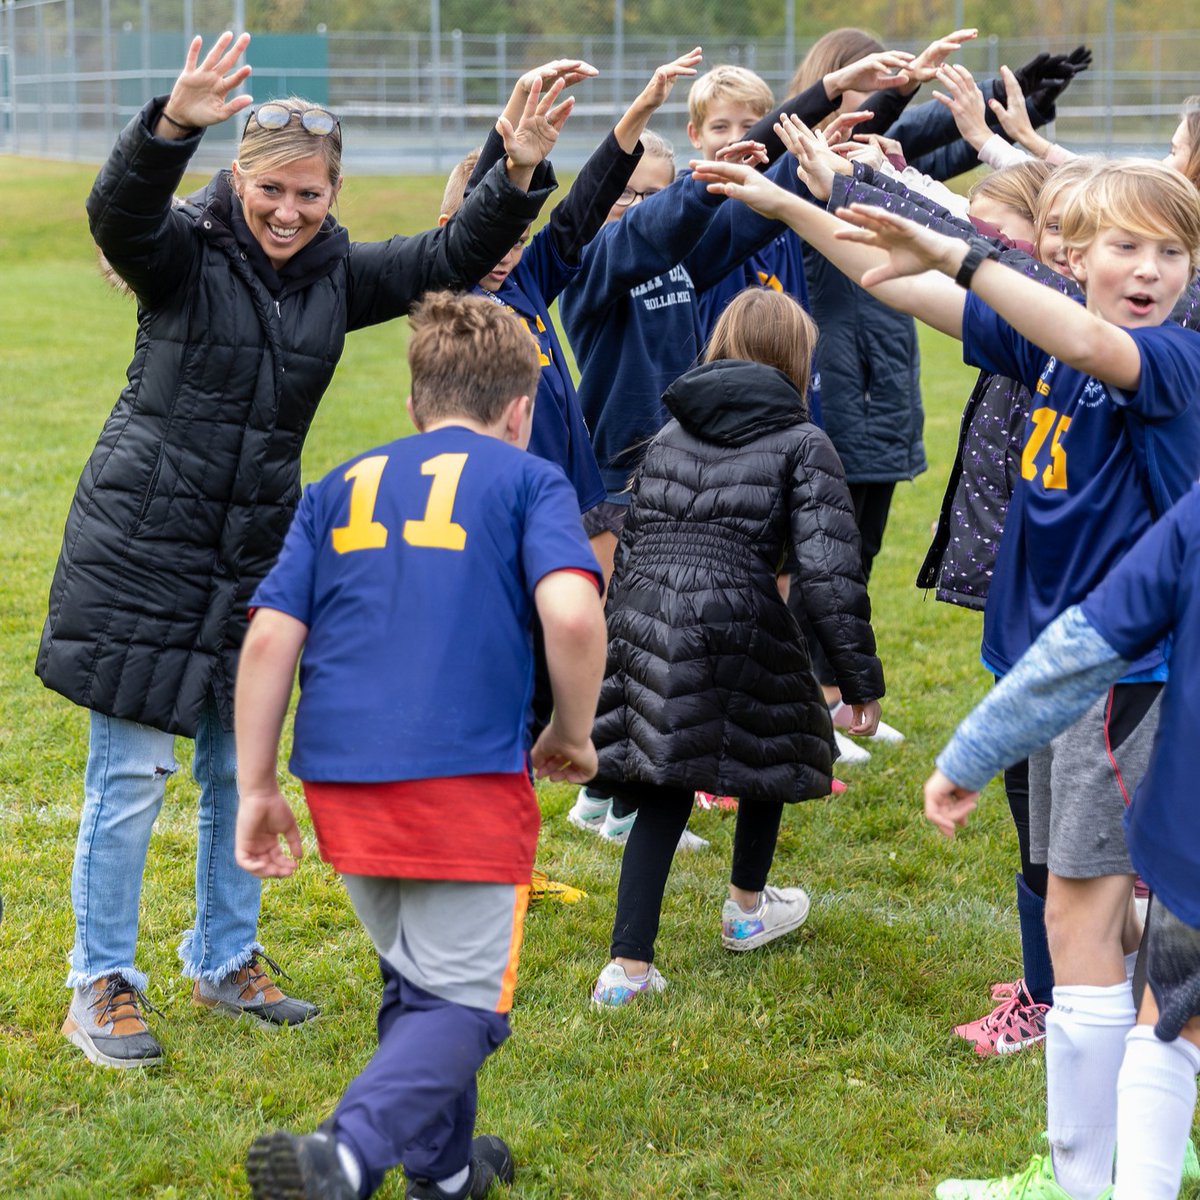 We love seeing a whole school support their Unified teams! Great job to all of our schools who participated in our Developmental Soccer tournament🤩 ⚽ #UnifiedTogetherTuesday